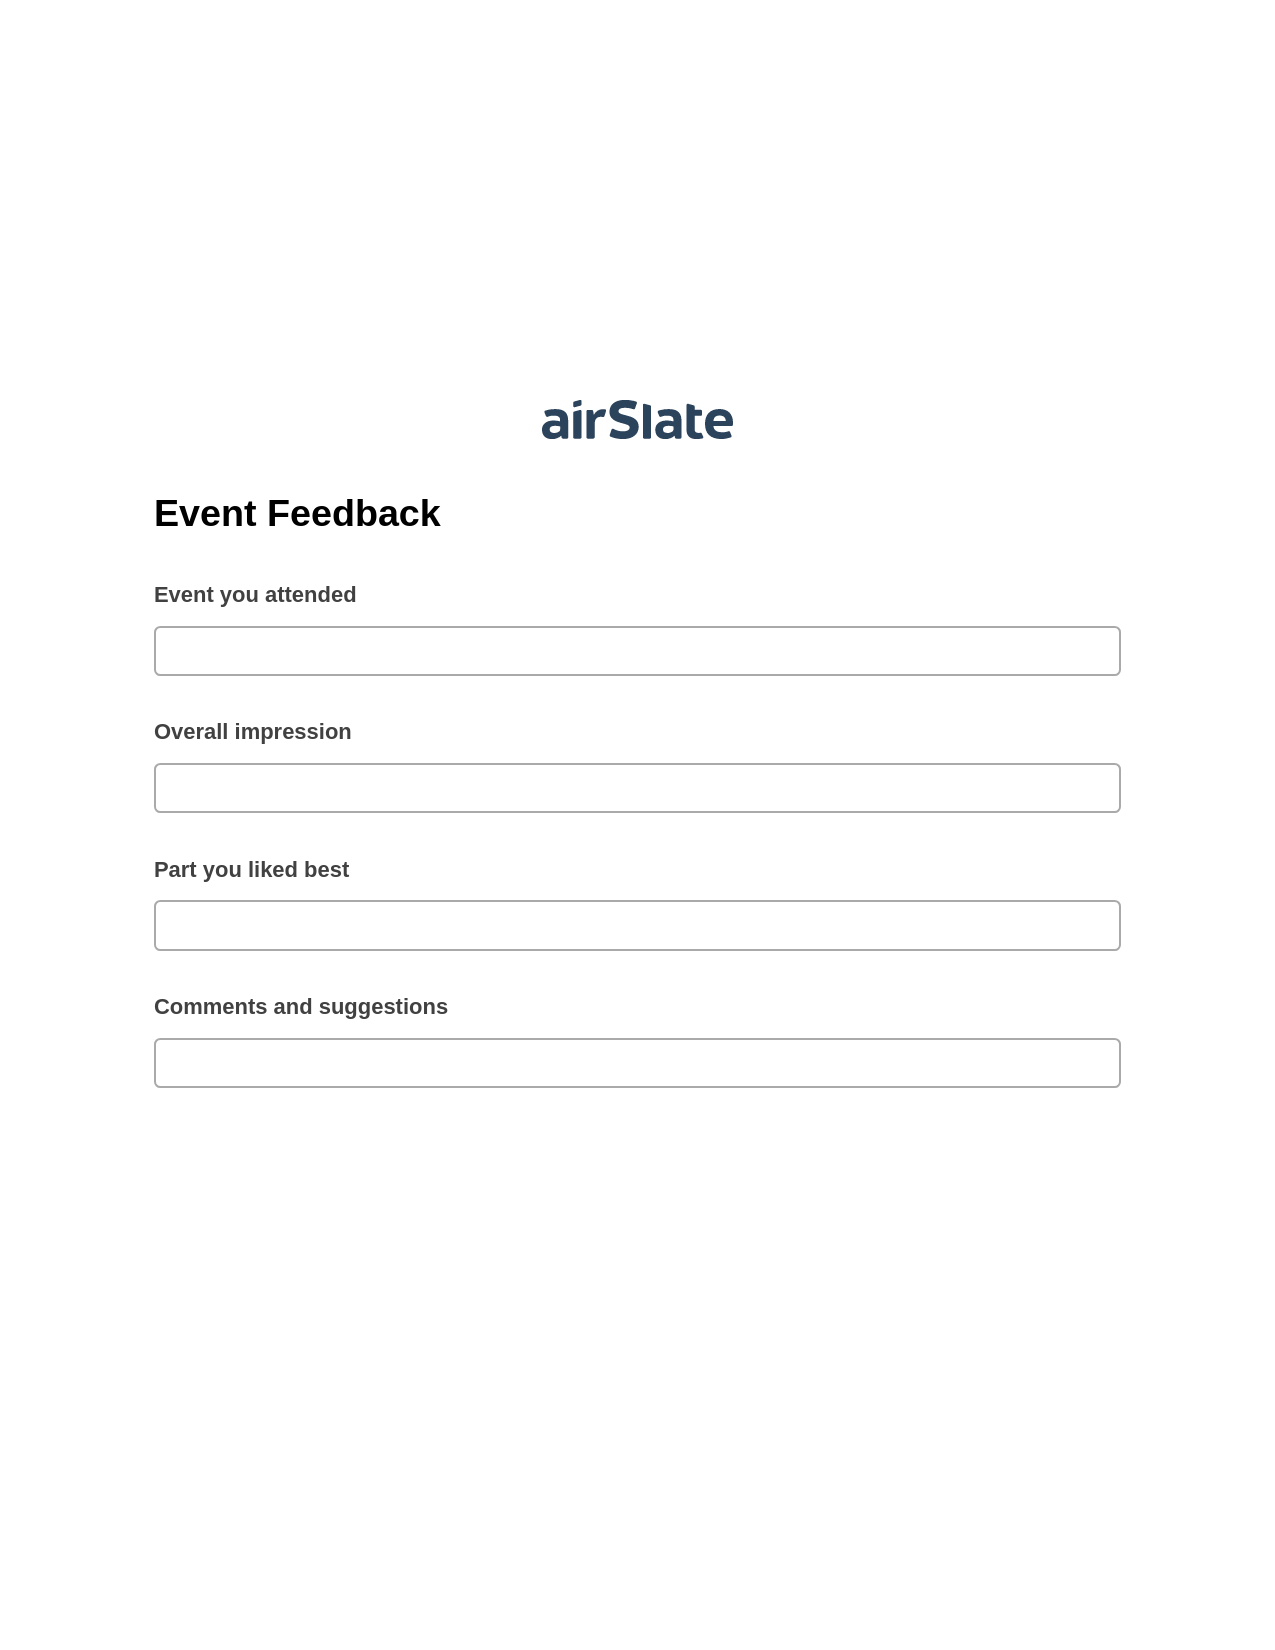 Event Feedback Pre-fill from another Slate Bot, Jira Bot, OneDrive Bot